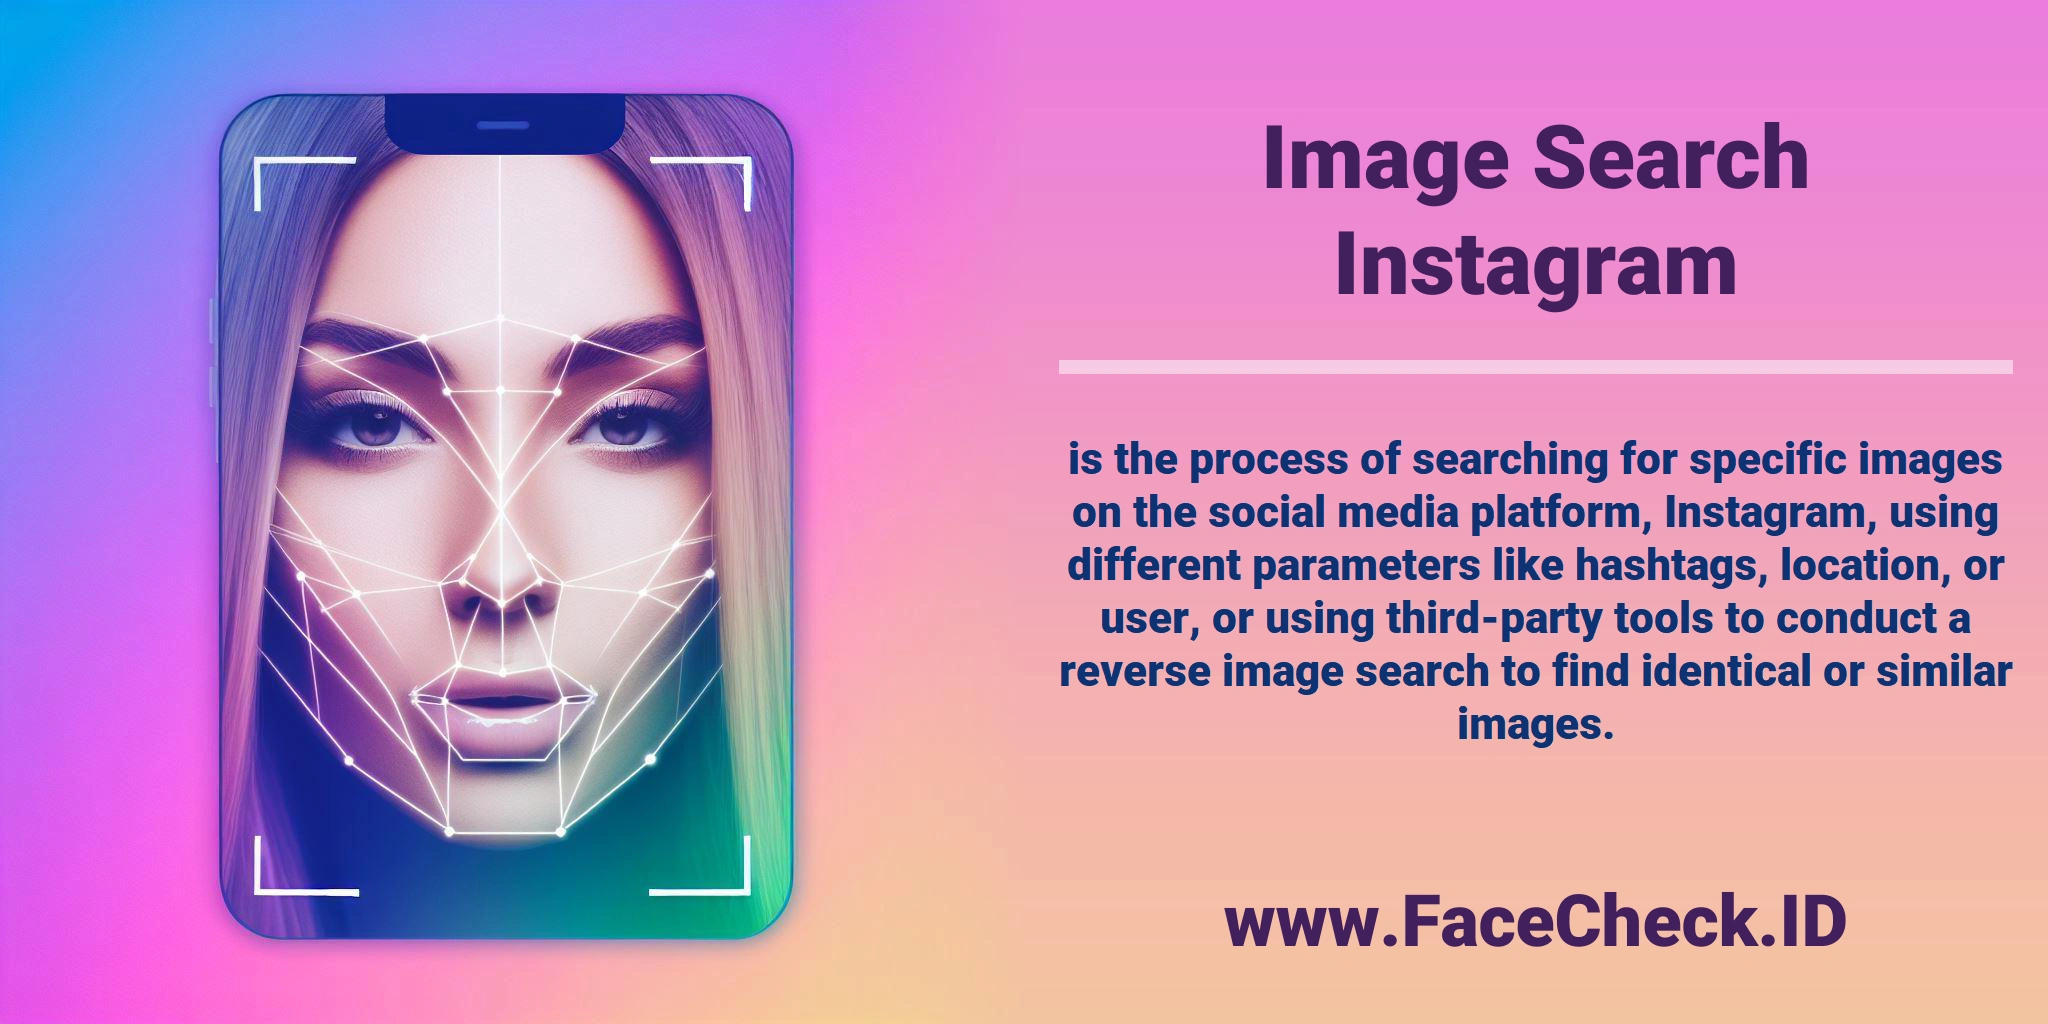 <b>Image Search Instagram</b> is the process of searching for specific images on the social media platform, Instagram, using different parameters like hashtags, location, or user, or using third-party tools to conduct a reverse image search to find identical or similar images.